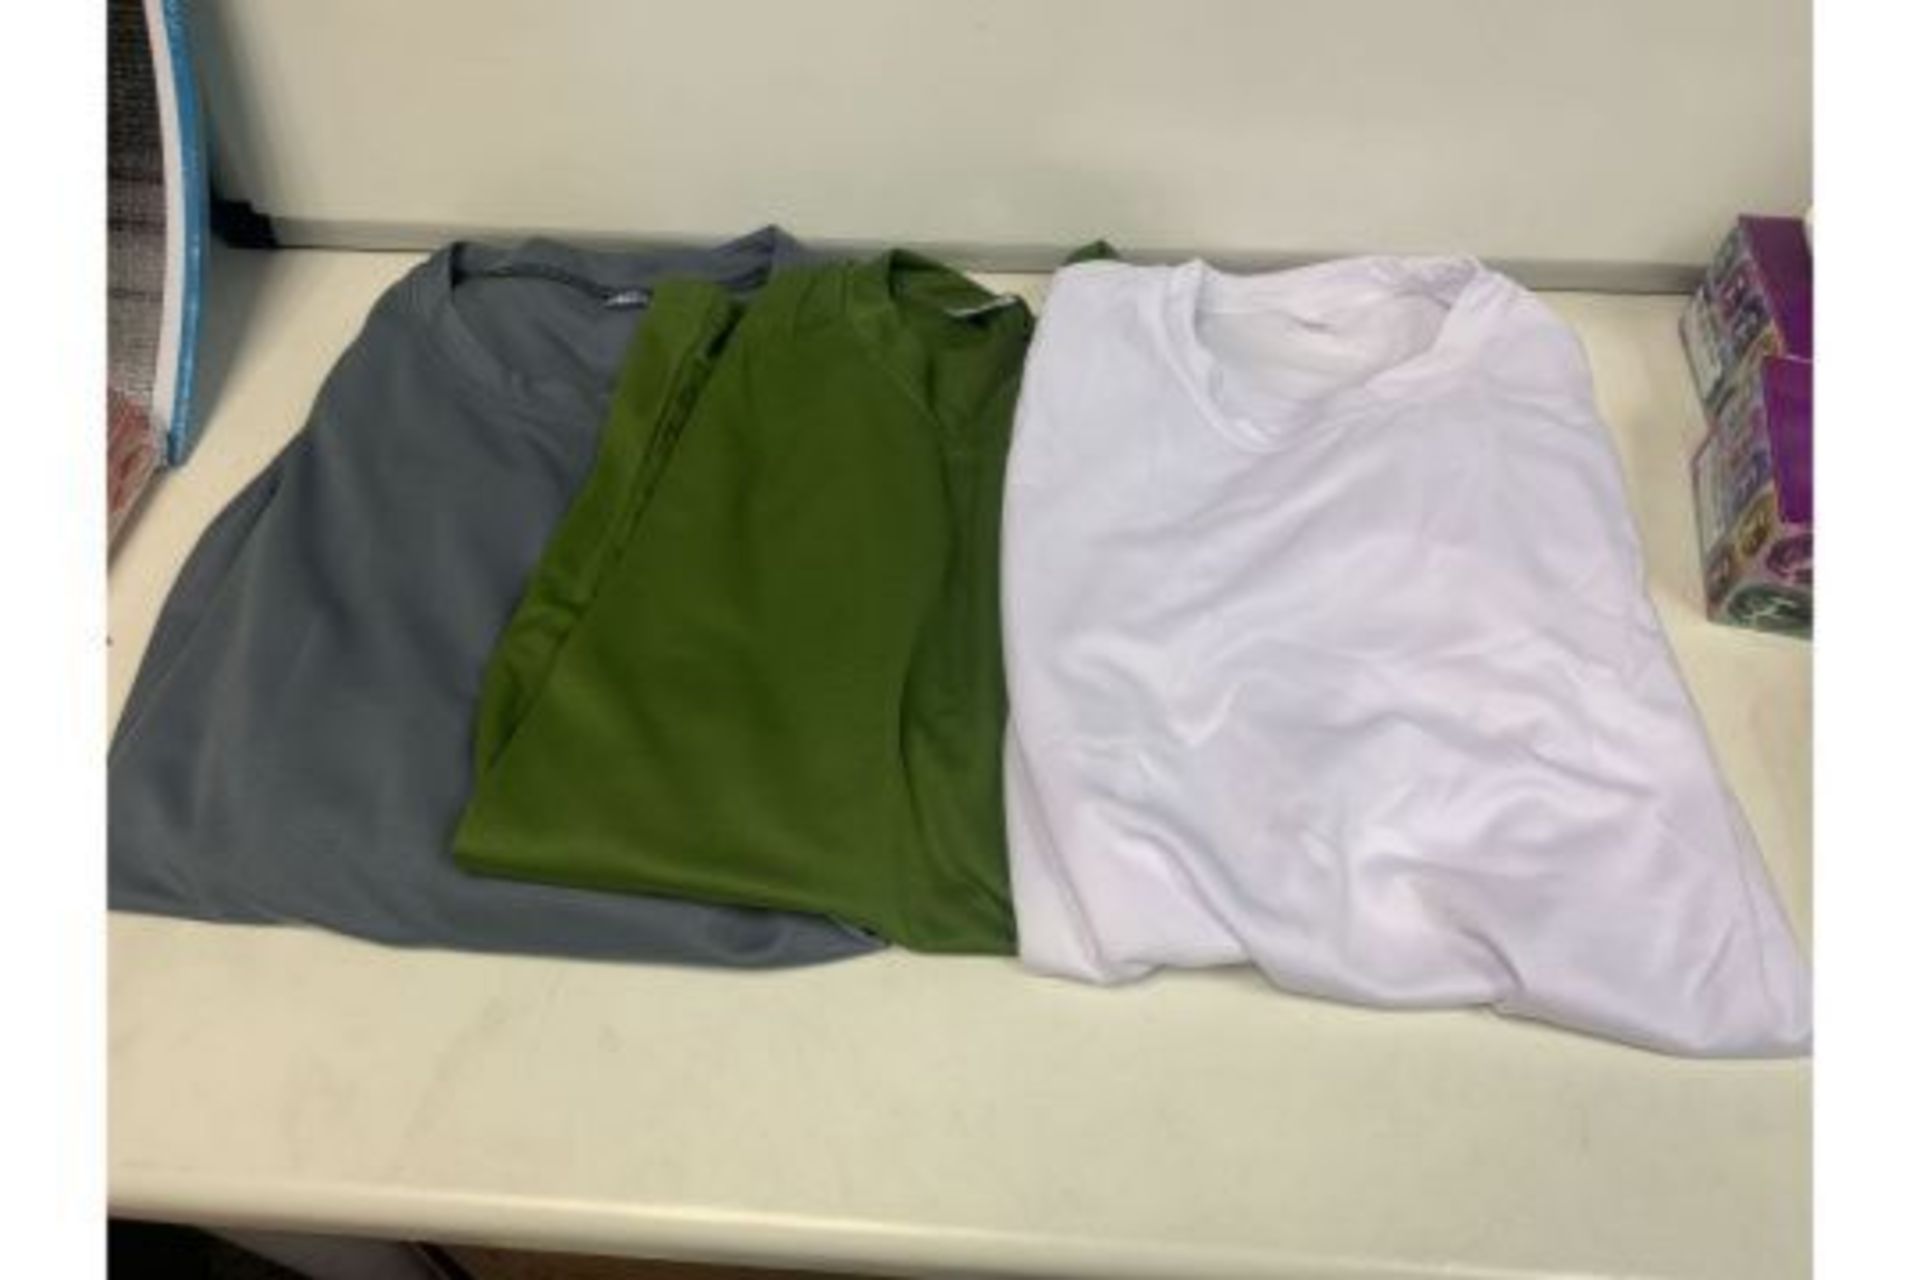 TRADE LOT 120 X BRAND NEW ASSORTED MESH SPORTS T SHIRTS IN VARIOUS COLOURS AND SIZES R17